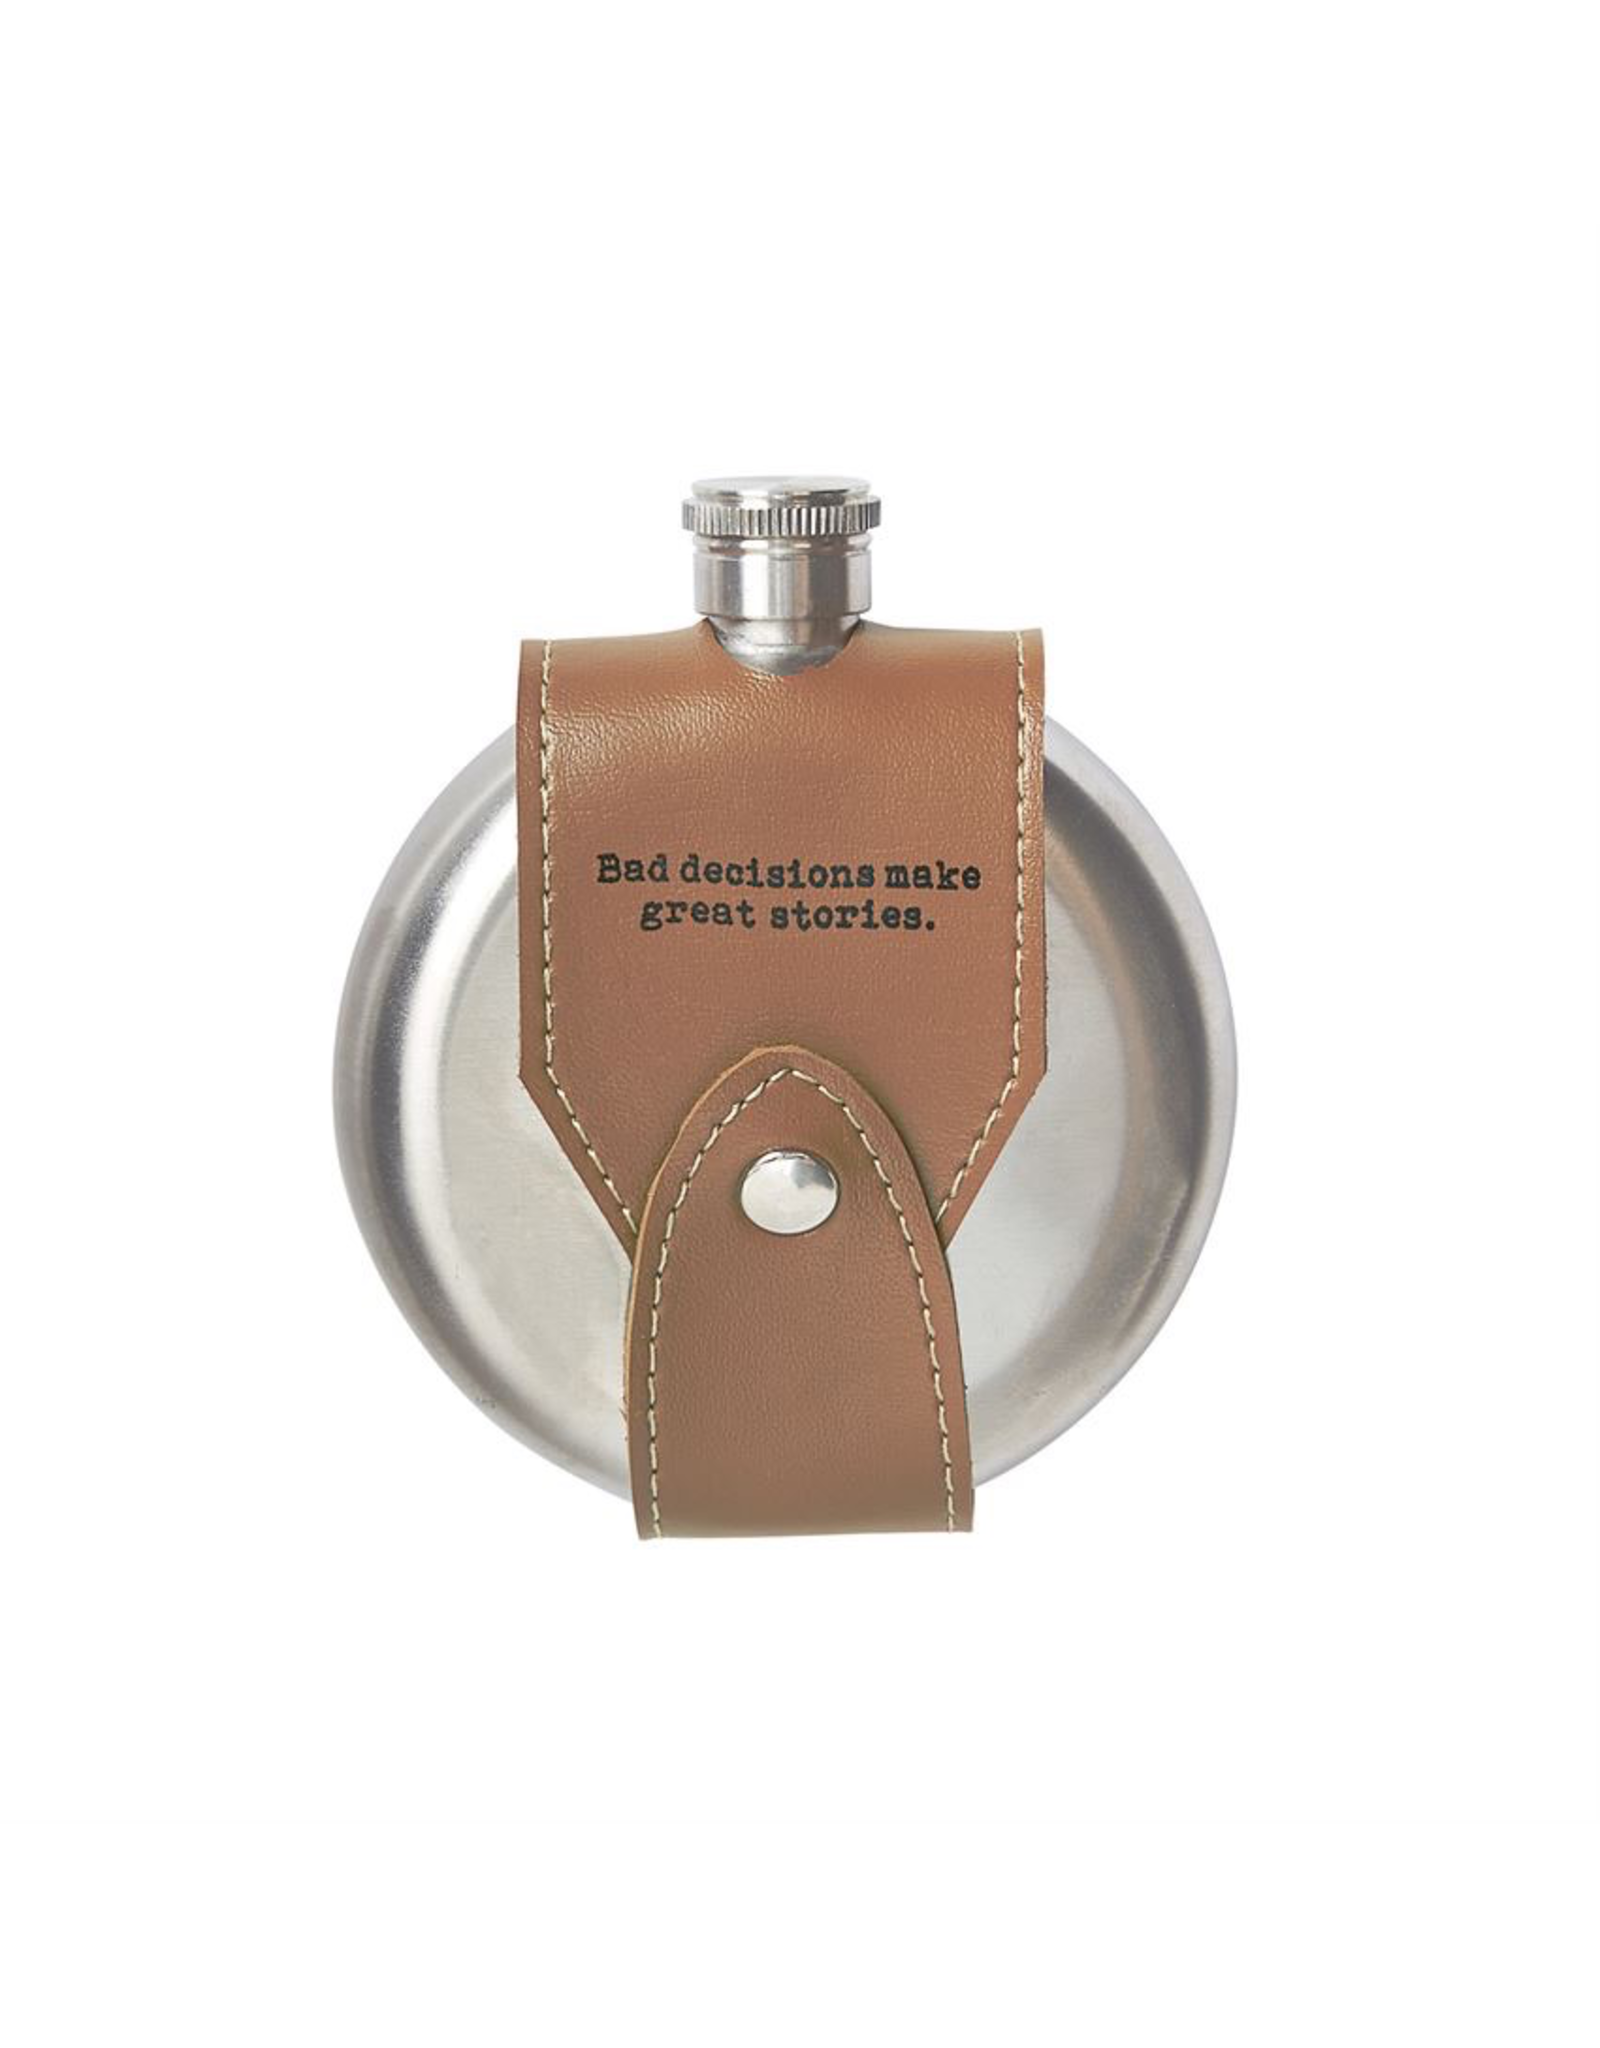 Mud Pie Leather Sentiment Flask 4oz w  Bad Decisions Make Great Stories